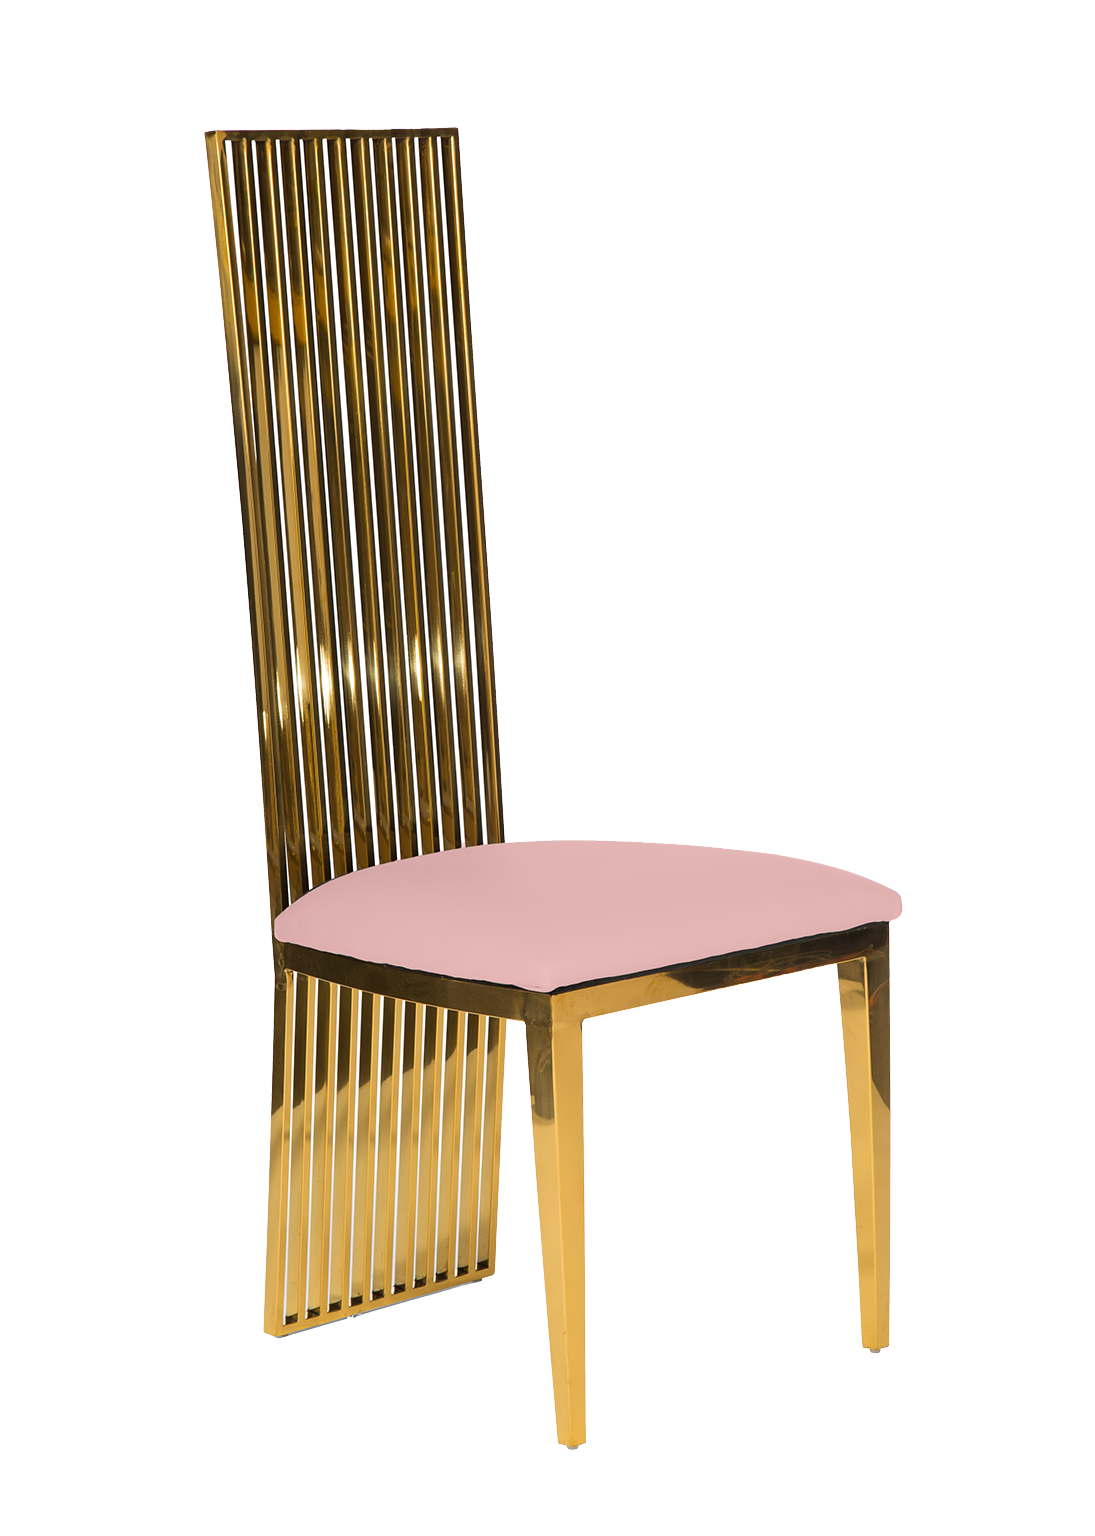 A modern chair with a tall, slatted golden backrest and a soft pink cushioned seat, set against a plain white background.